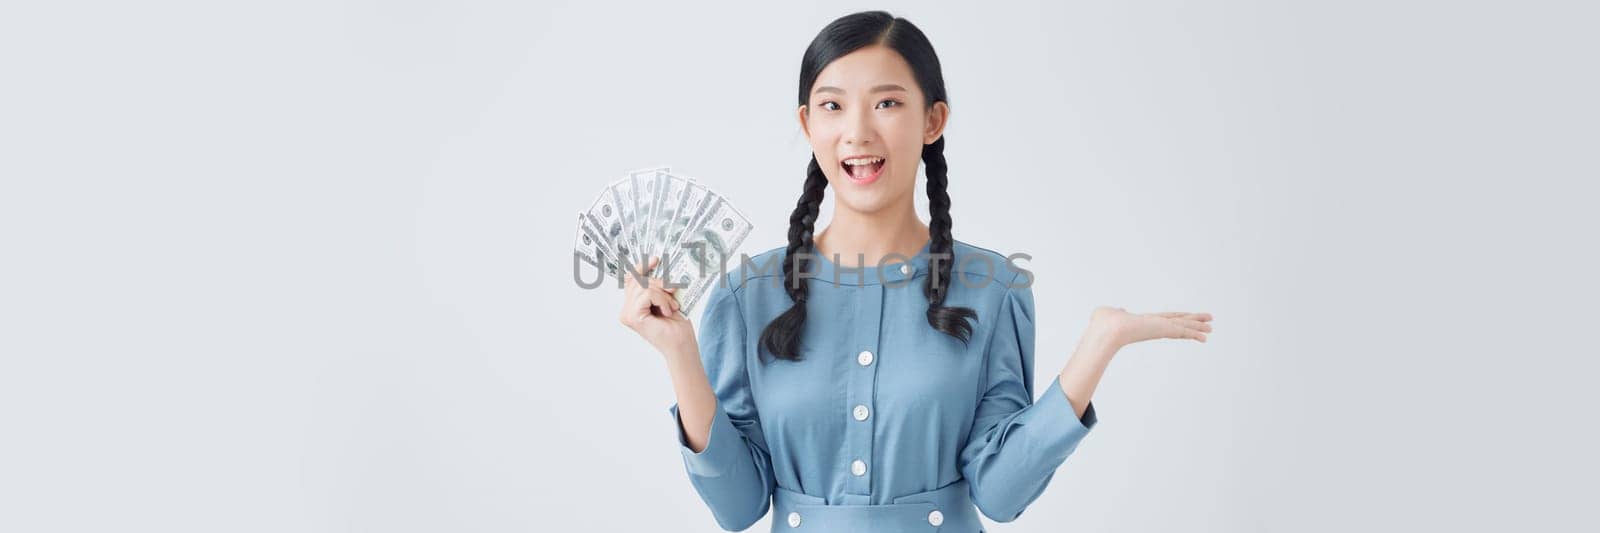 Attractive cheerful girl holding demonstrating fan cash salary income isolated over white background by makidotvn